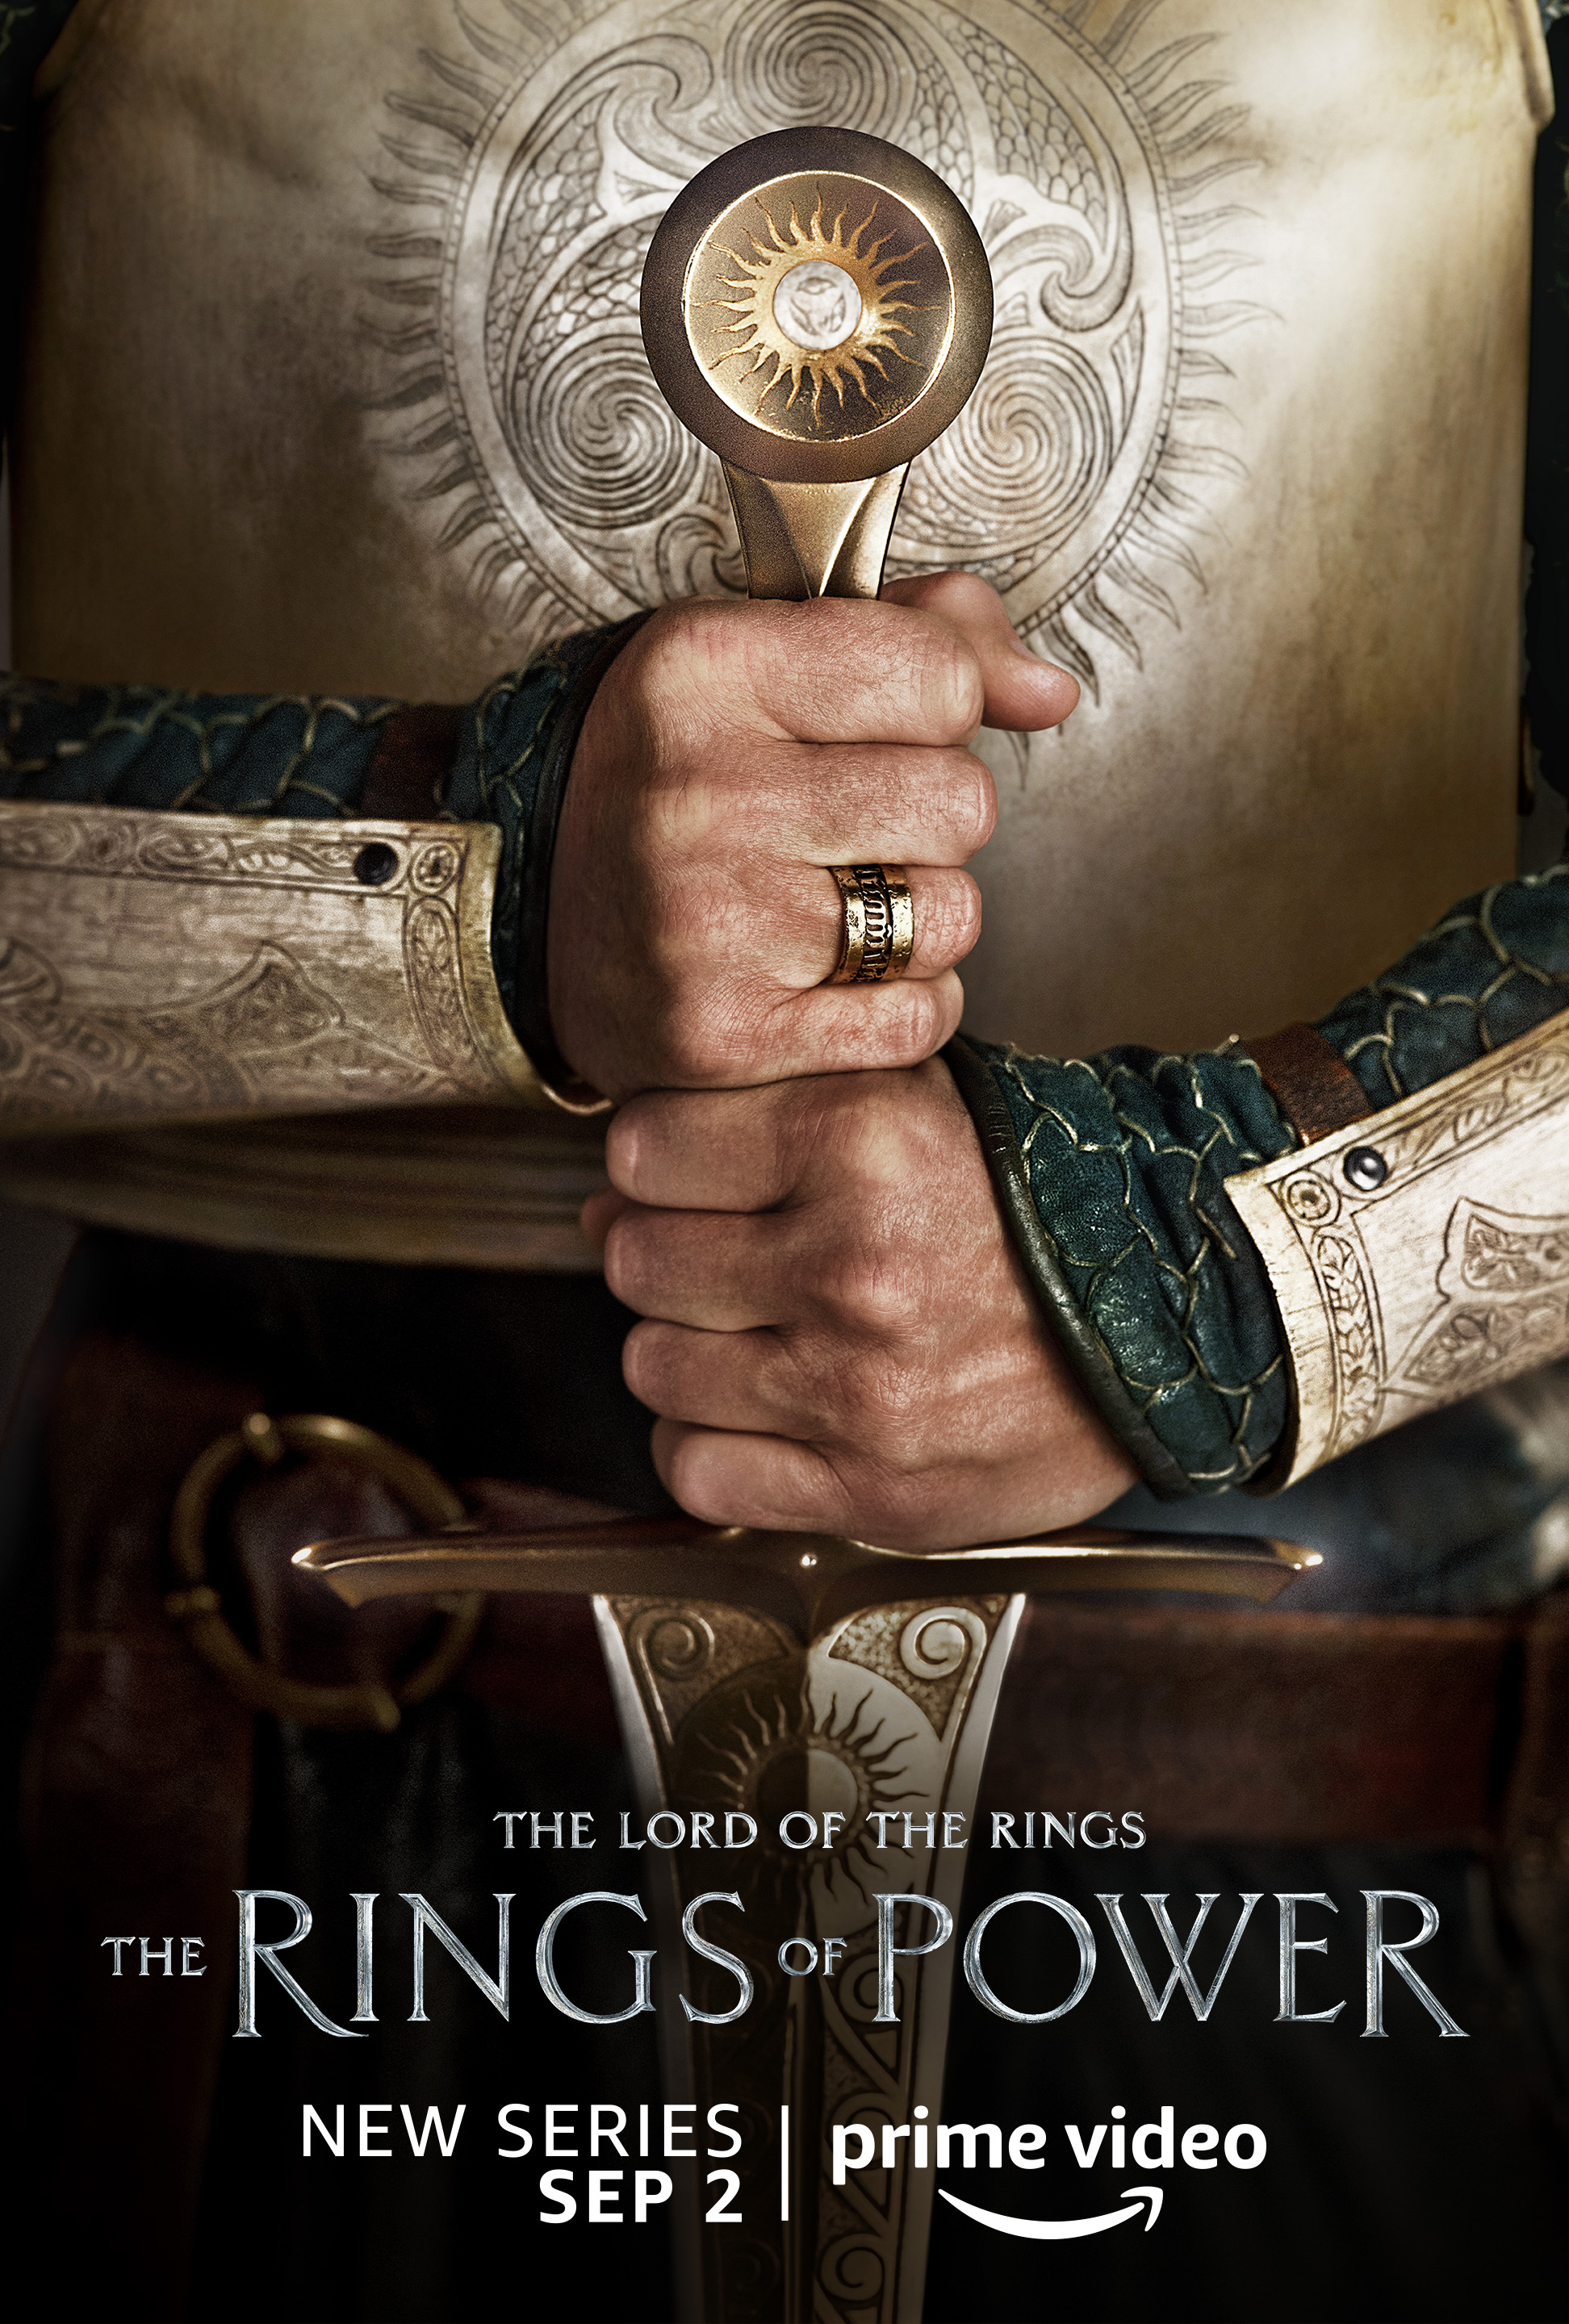 Pan prstenu: Prsteny moci / The Lord of the Rings: The Rings of Power S01E05 (2022)(CZ/EN)[Web-DL][2160p] = CSFD 66%